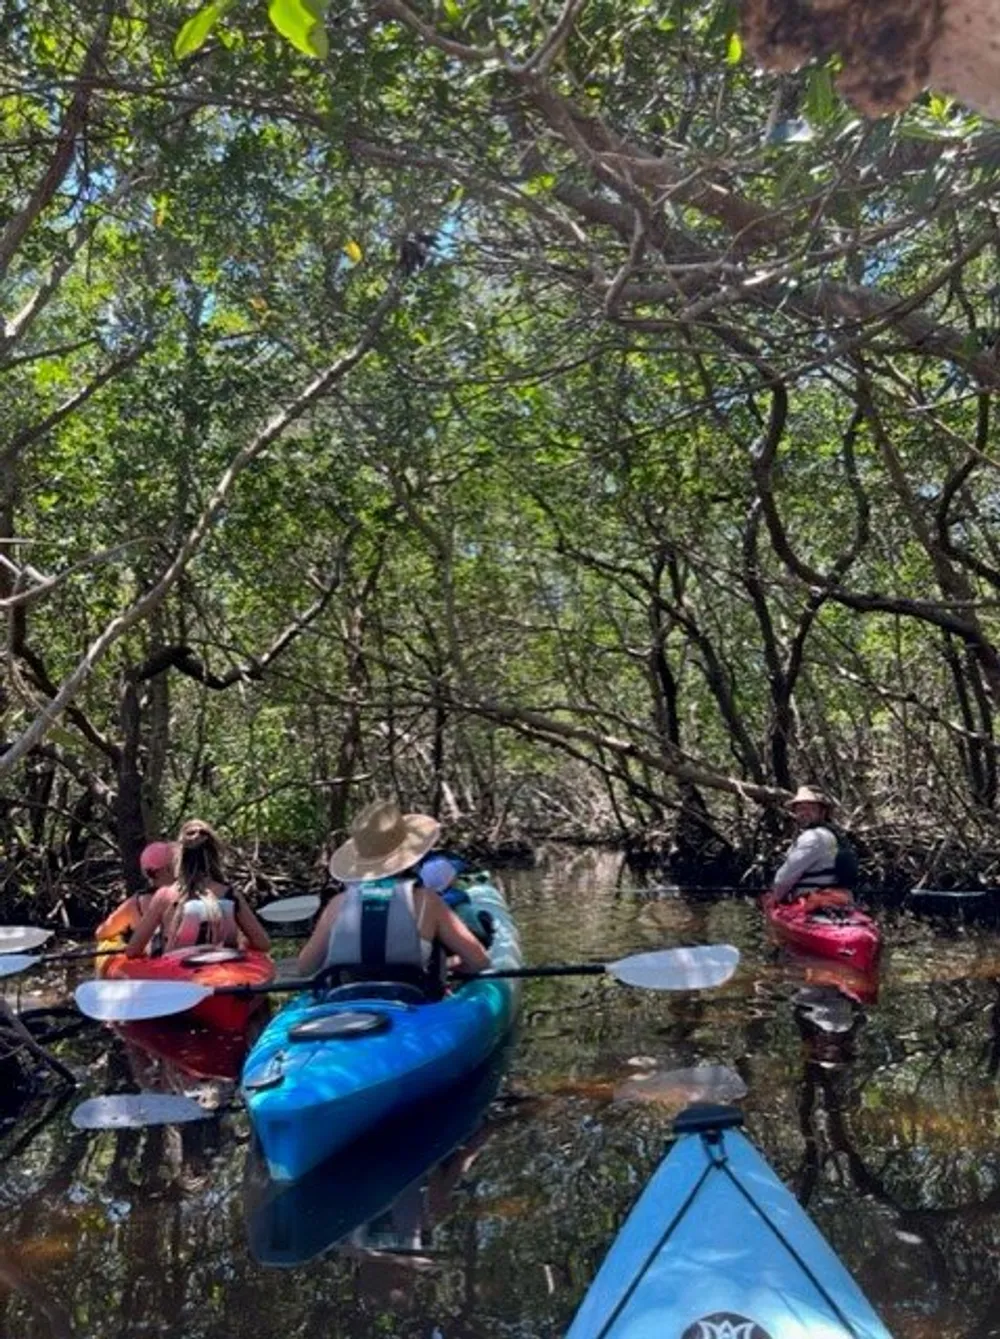 A group of kayakers navigates through a serene mangrove tunnel surrounded by lush greenery and clear water